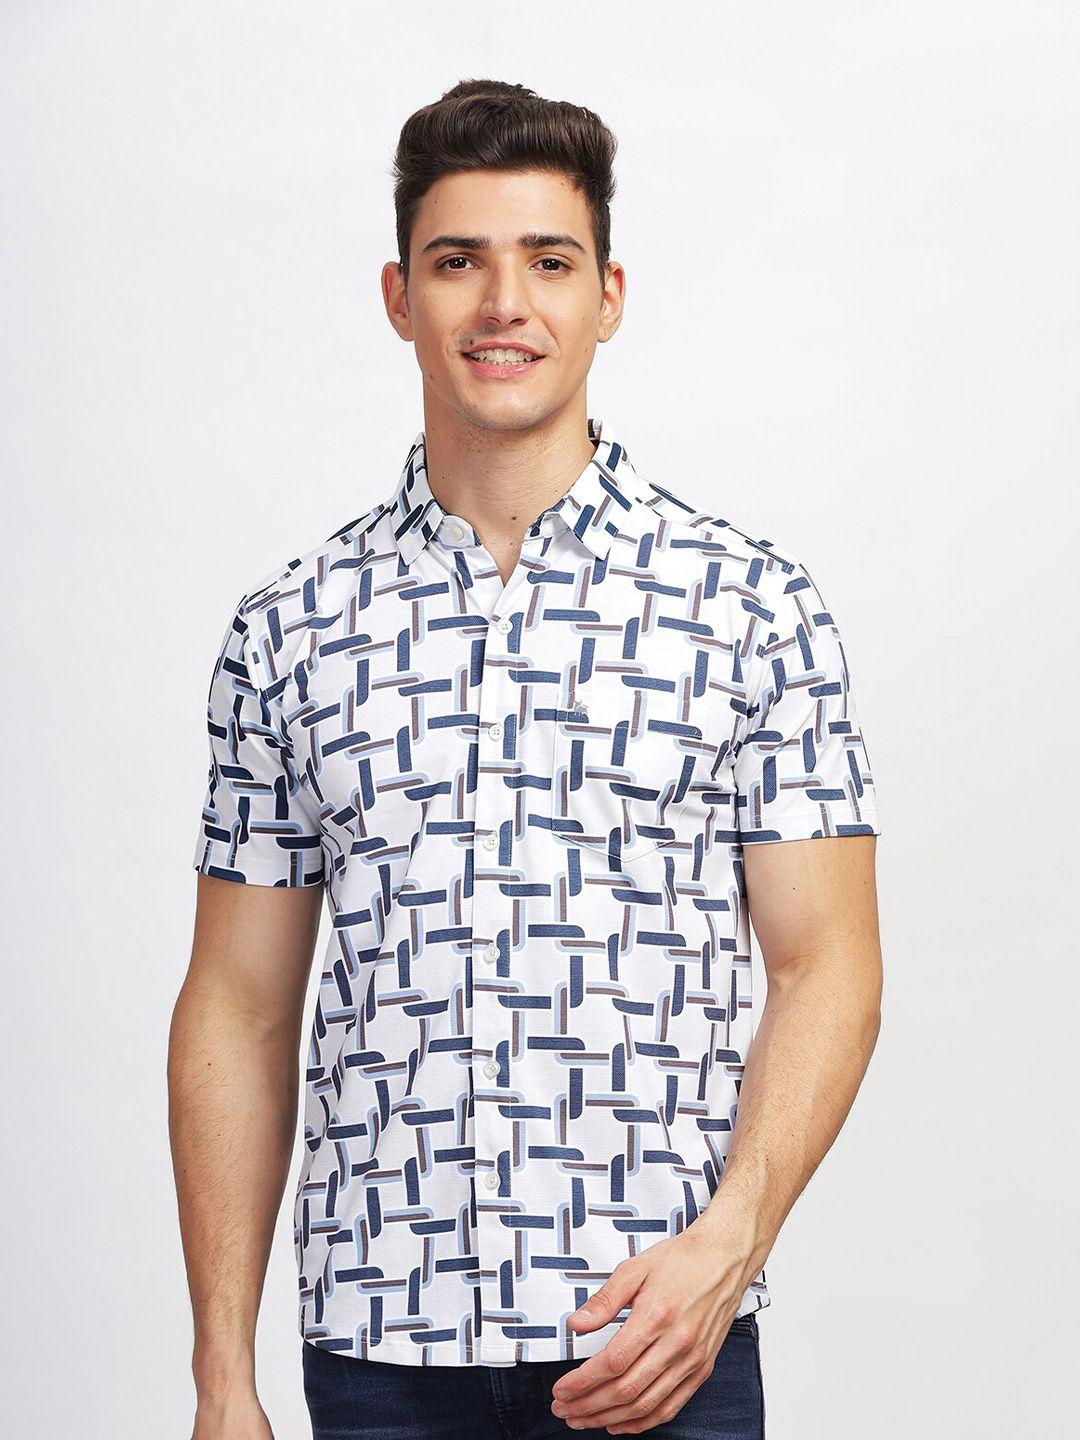 bullmer straight geometric printed spread collar cotton curved casual shirt